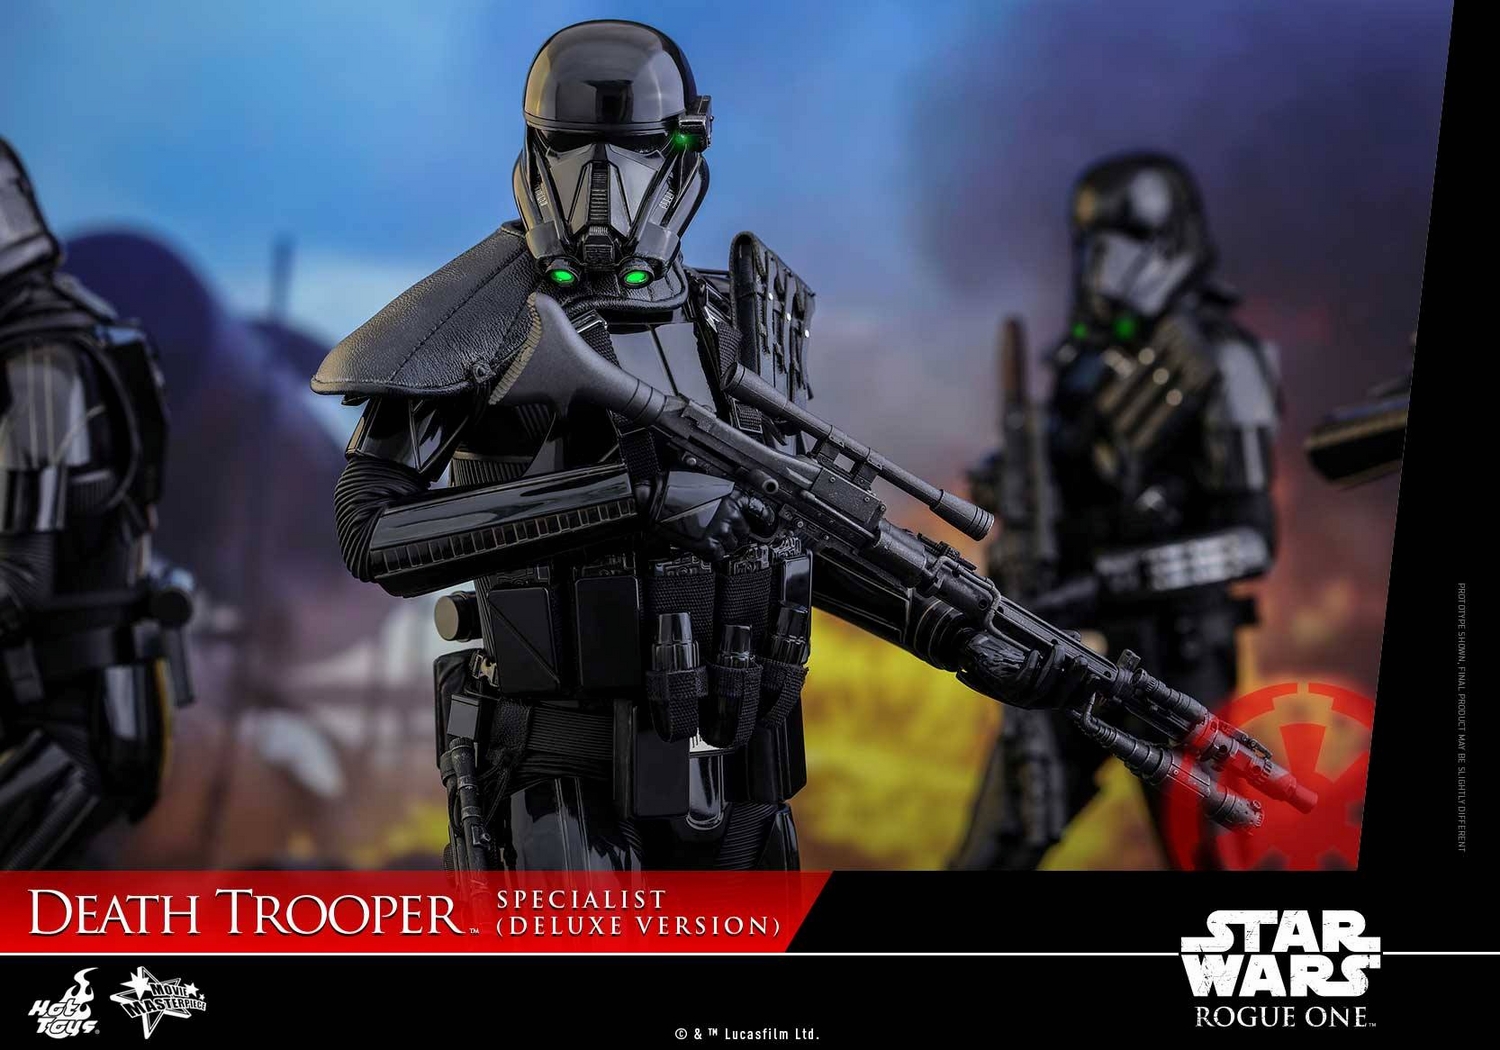 rogue-one-sixth-scale-death-trooper-specialist-deluxe-version-111516-007.jpg